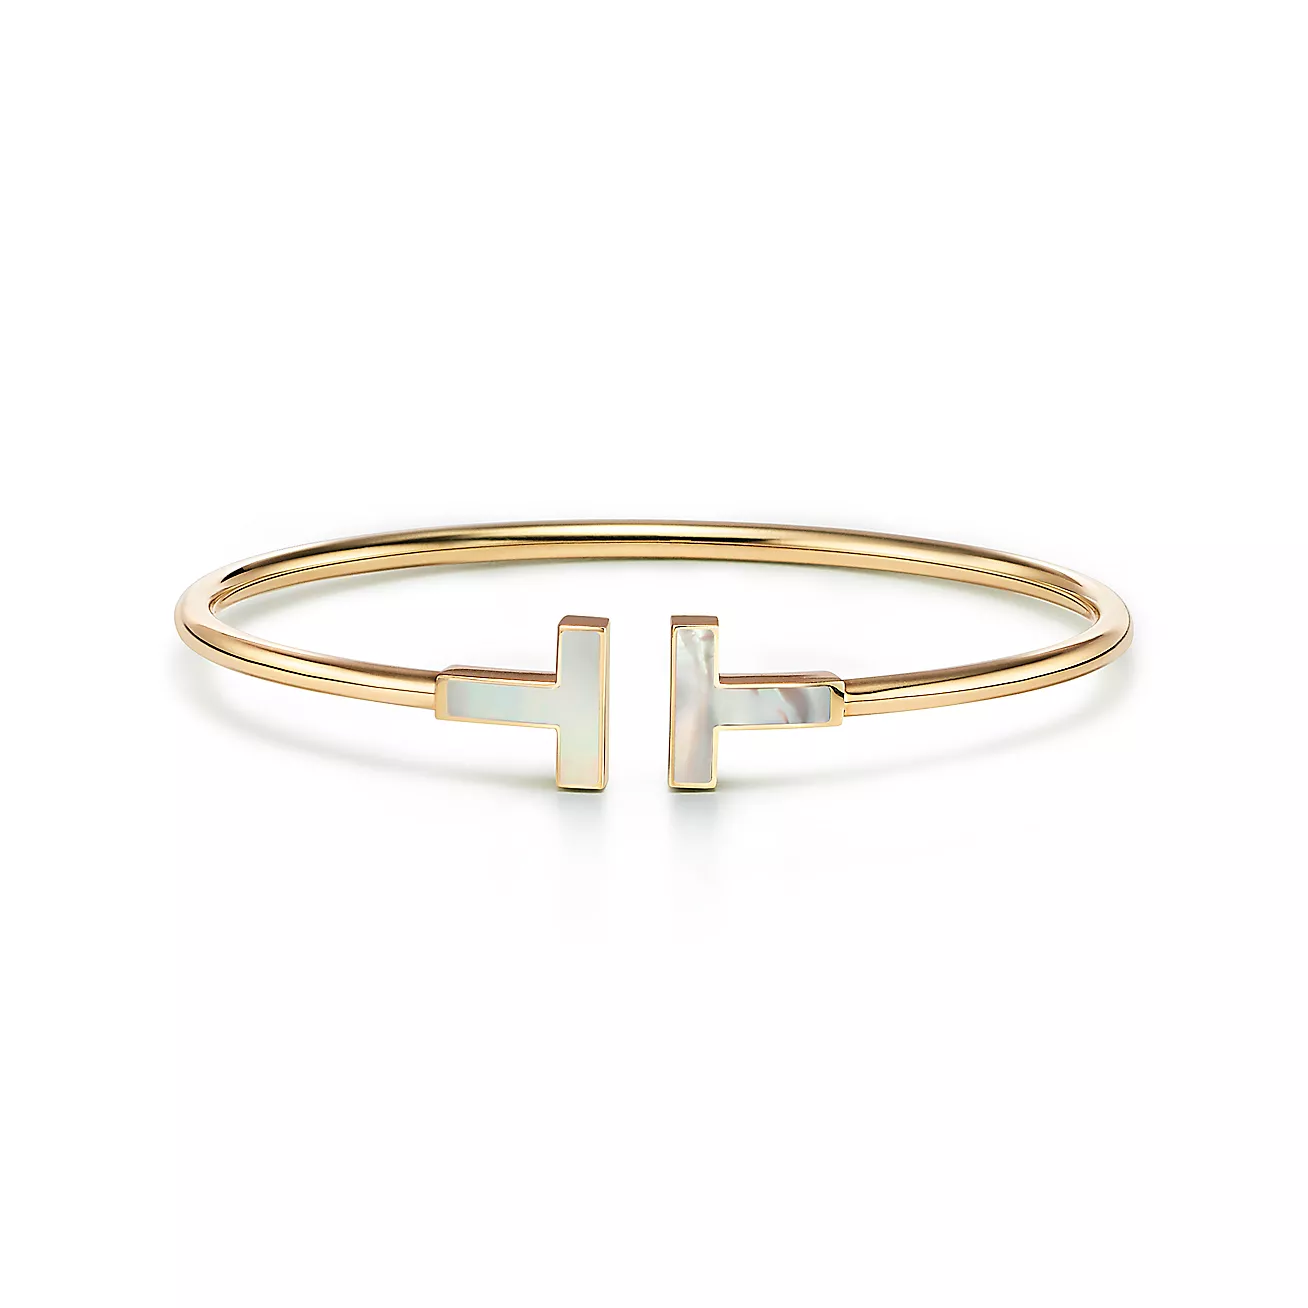 Tiffany T Wire Bracelet in Yellow Gold with Mother-of-pearl